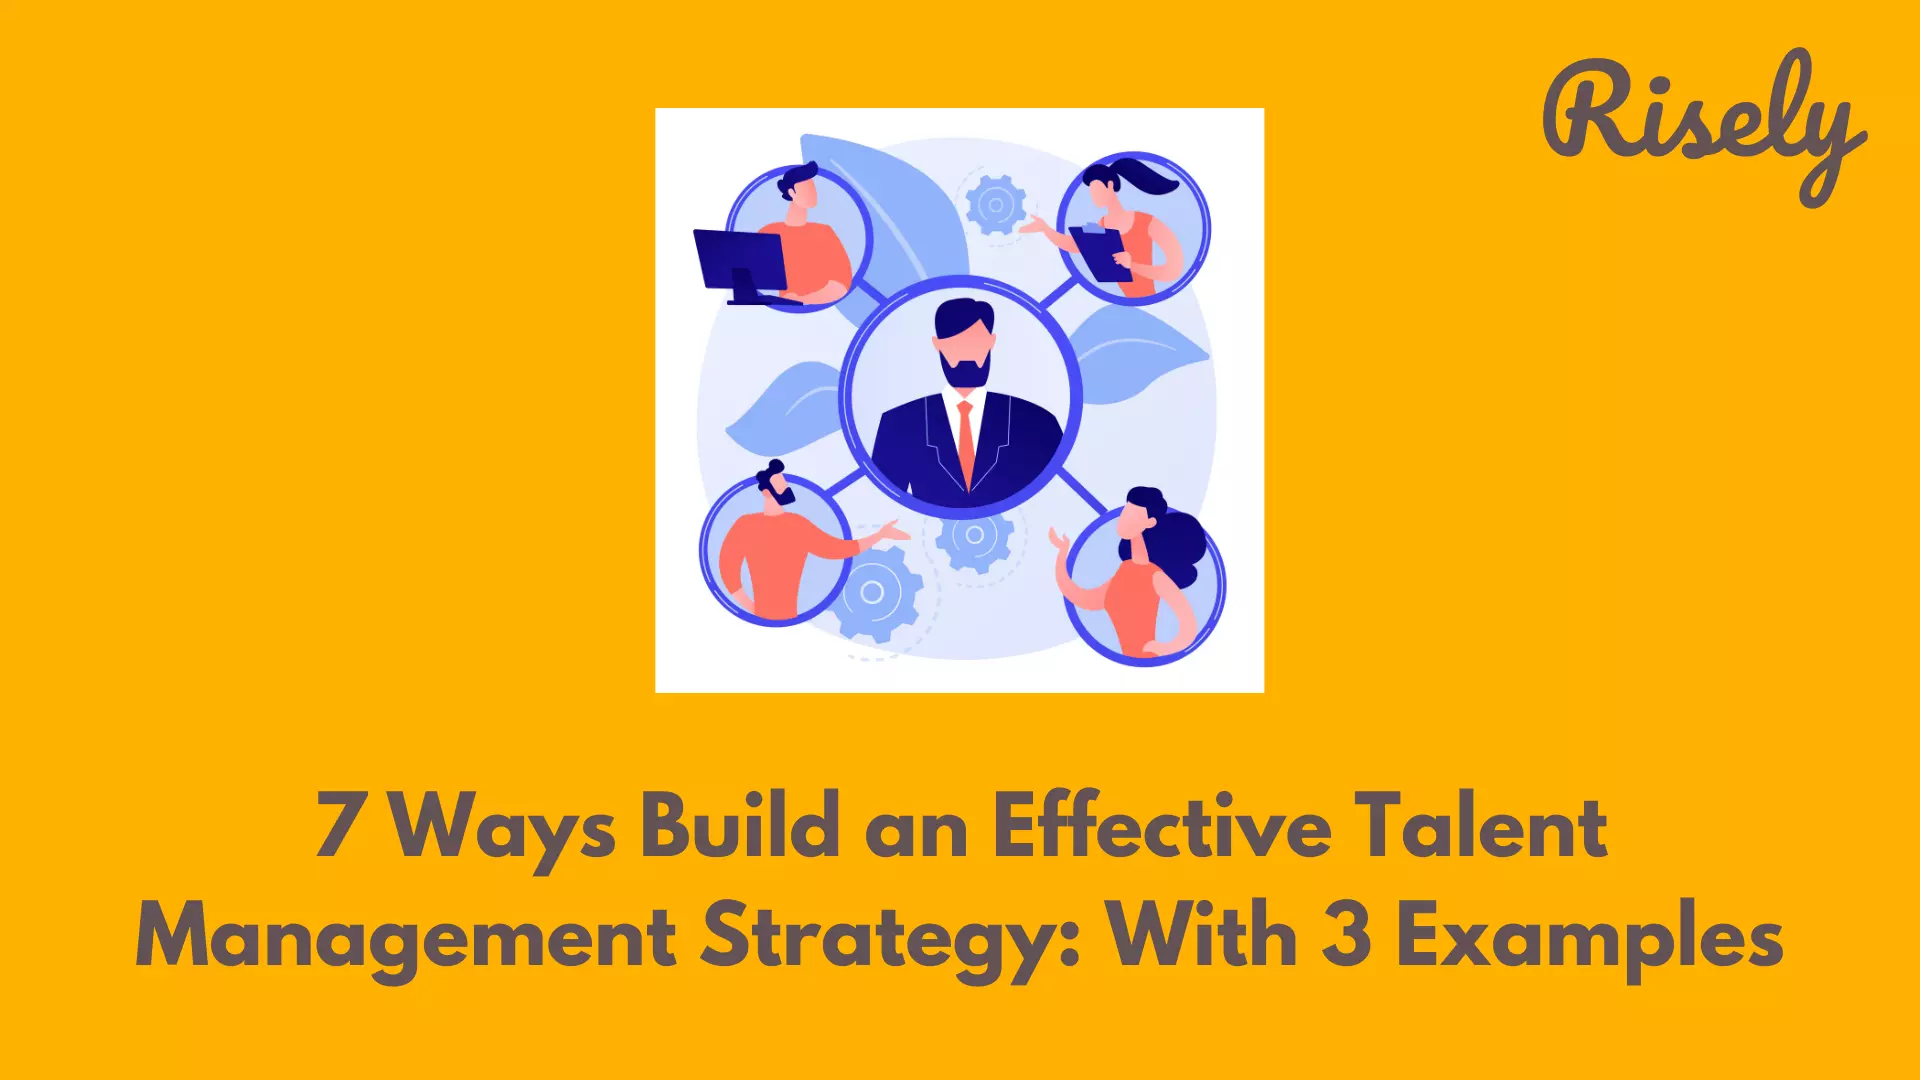 7 Ways to Build an Effective Talent Management Strategy: With 3 Real-life Examples